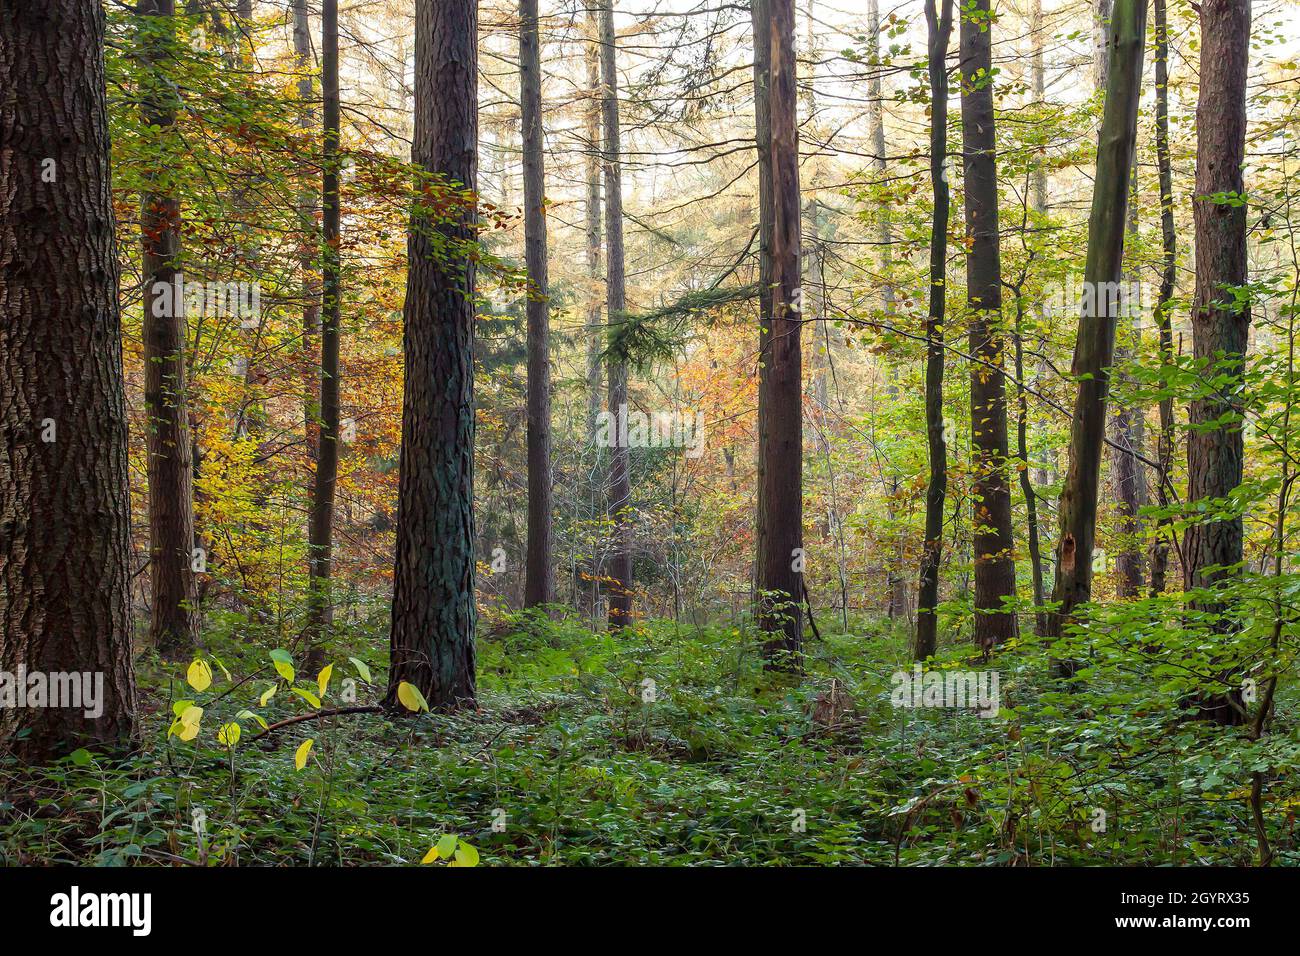 Mixed woodland in autumn with deciduous and evergreen trees Stock Photo